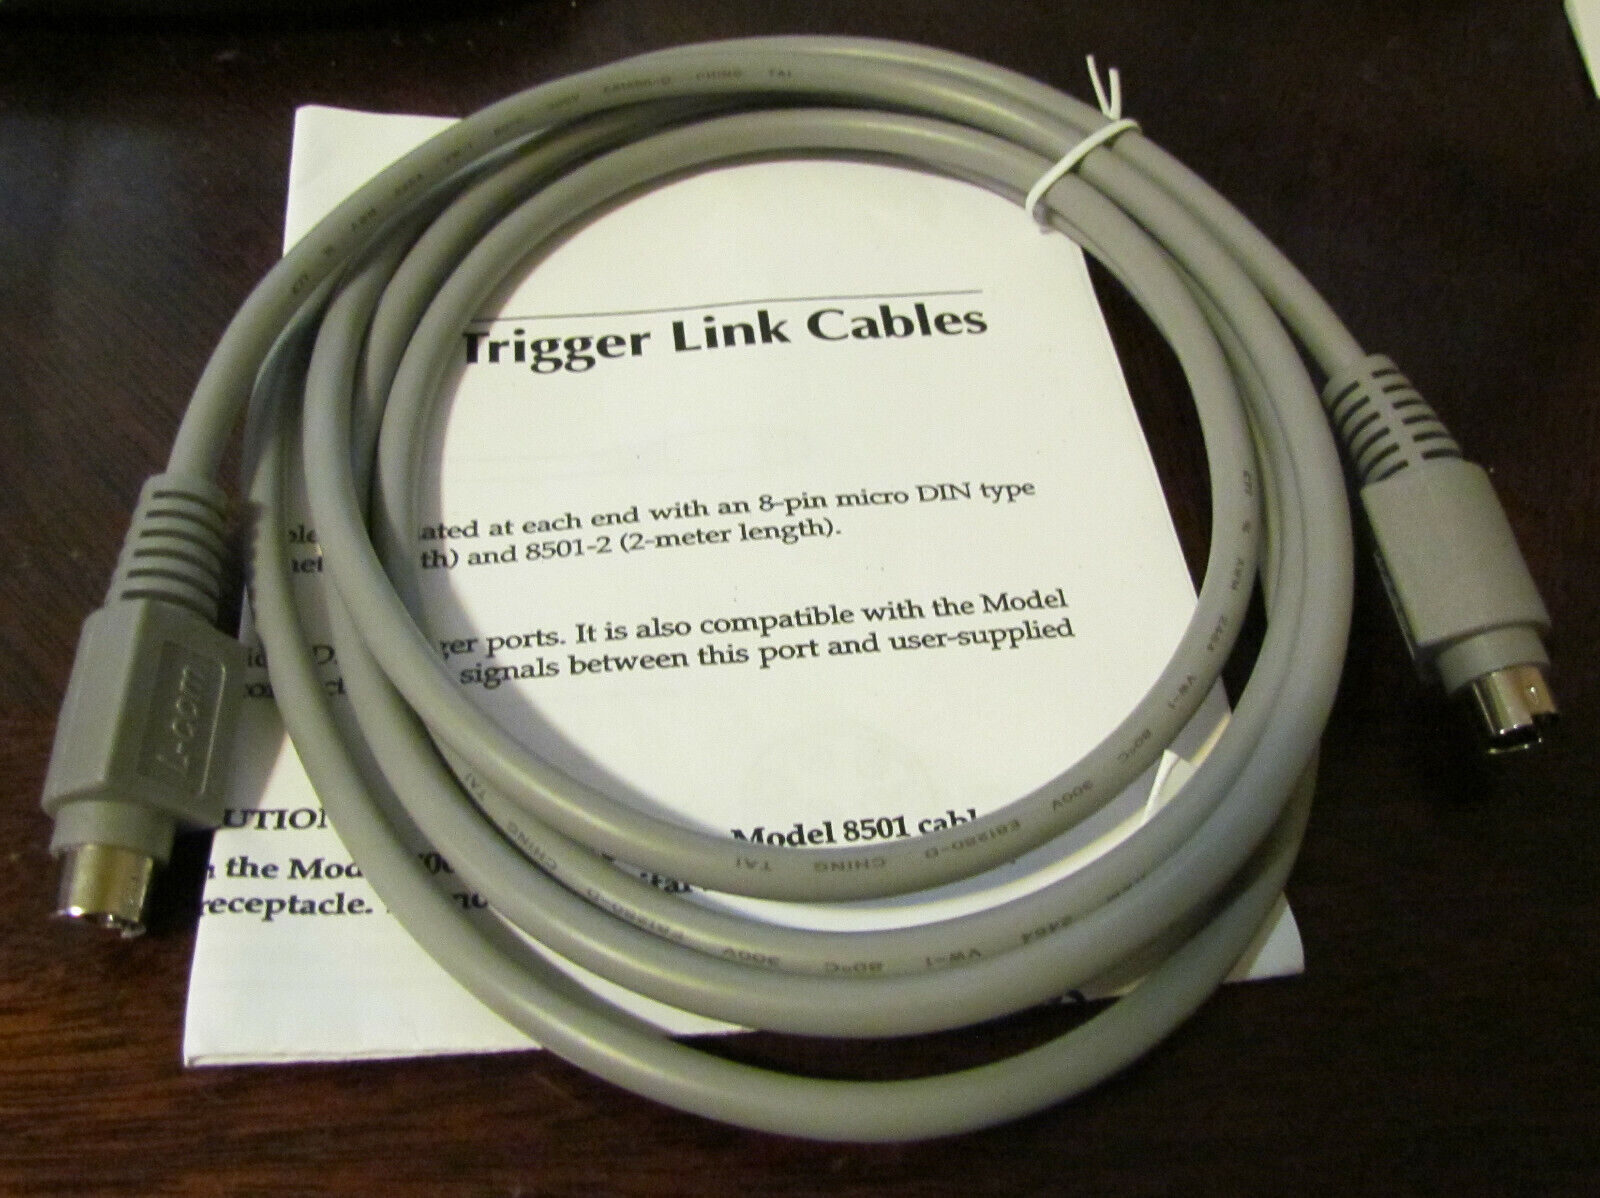 Keithley Model: 8501-2 オープニング 日本人気超絶の Trigger Link Cable. Old Stock. Fact New